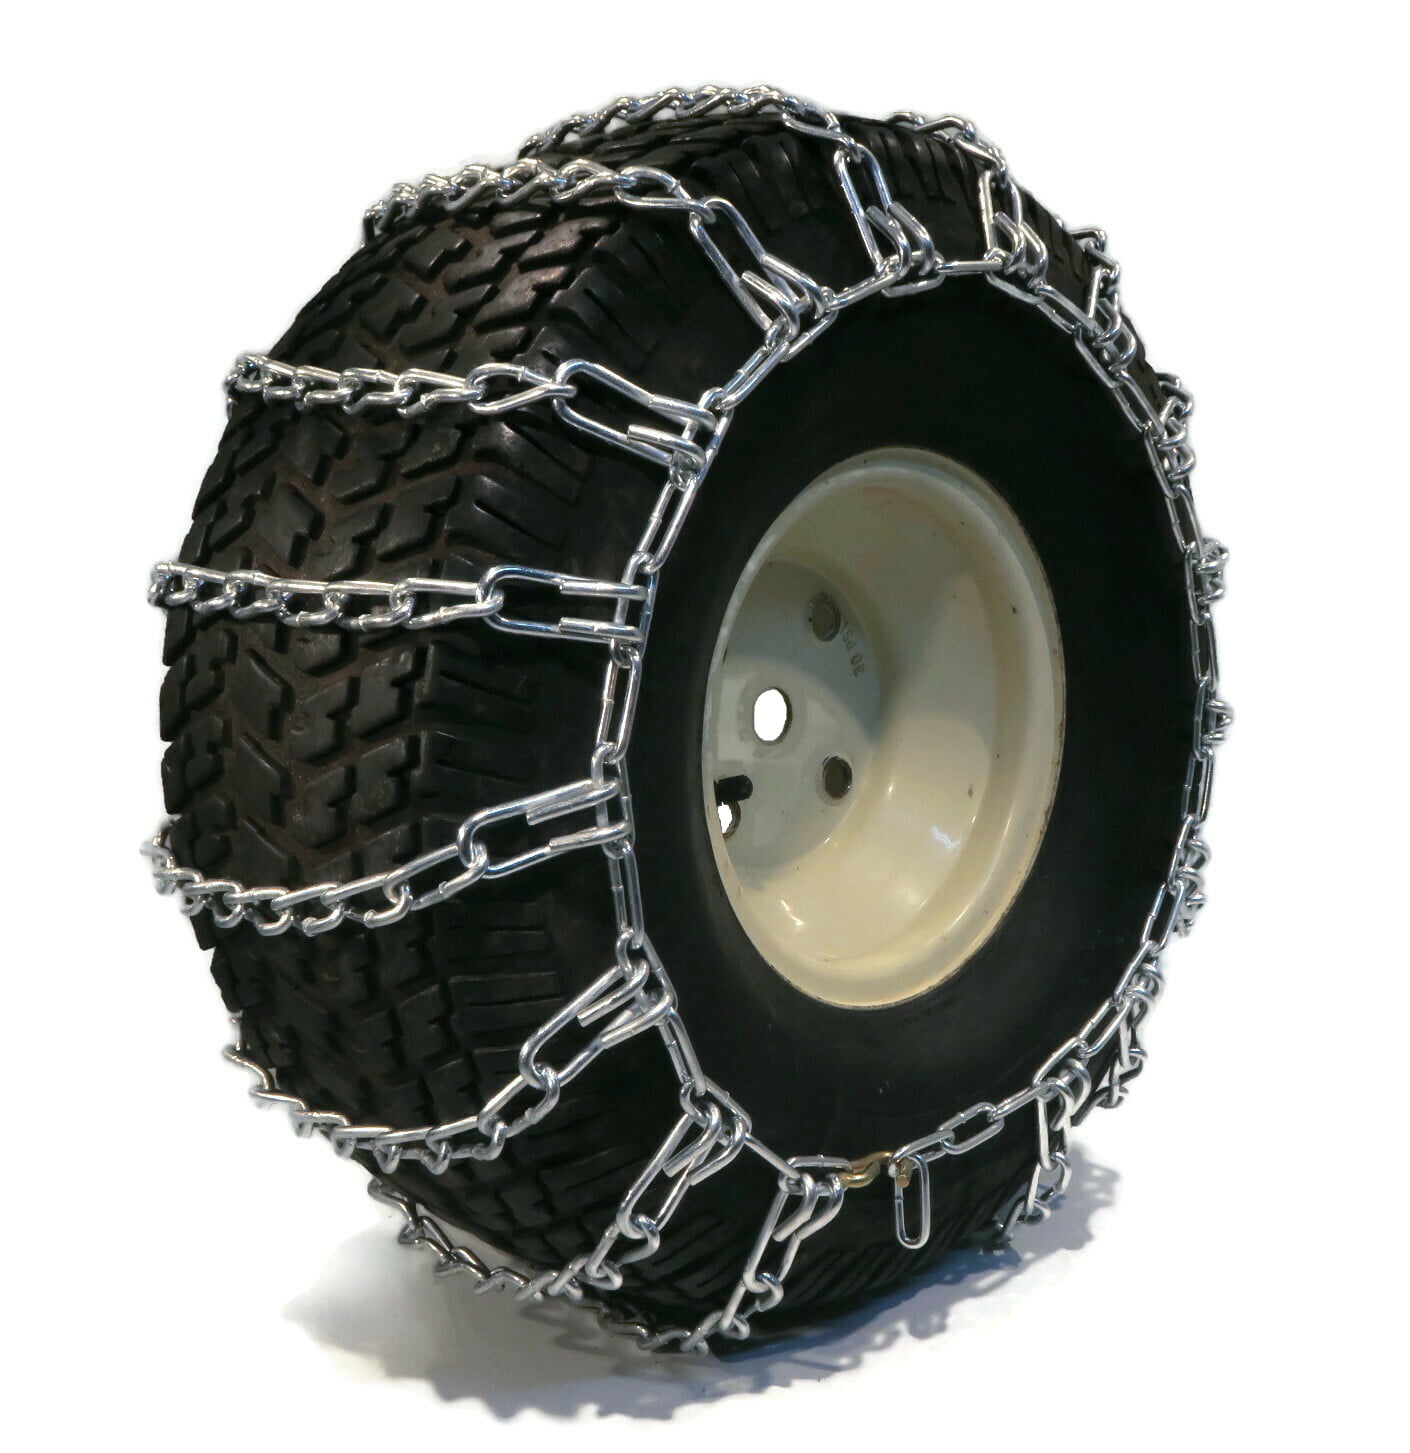 ,#id PAIR 2 Link TIRE CHAINS 23x8.50x12 for Toro Wheel Horse Lawn Mower Tractor Rider theropshop; TRYK80271680552425 